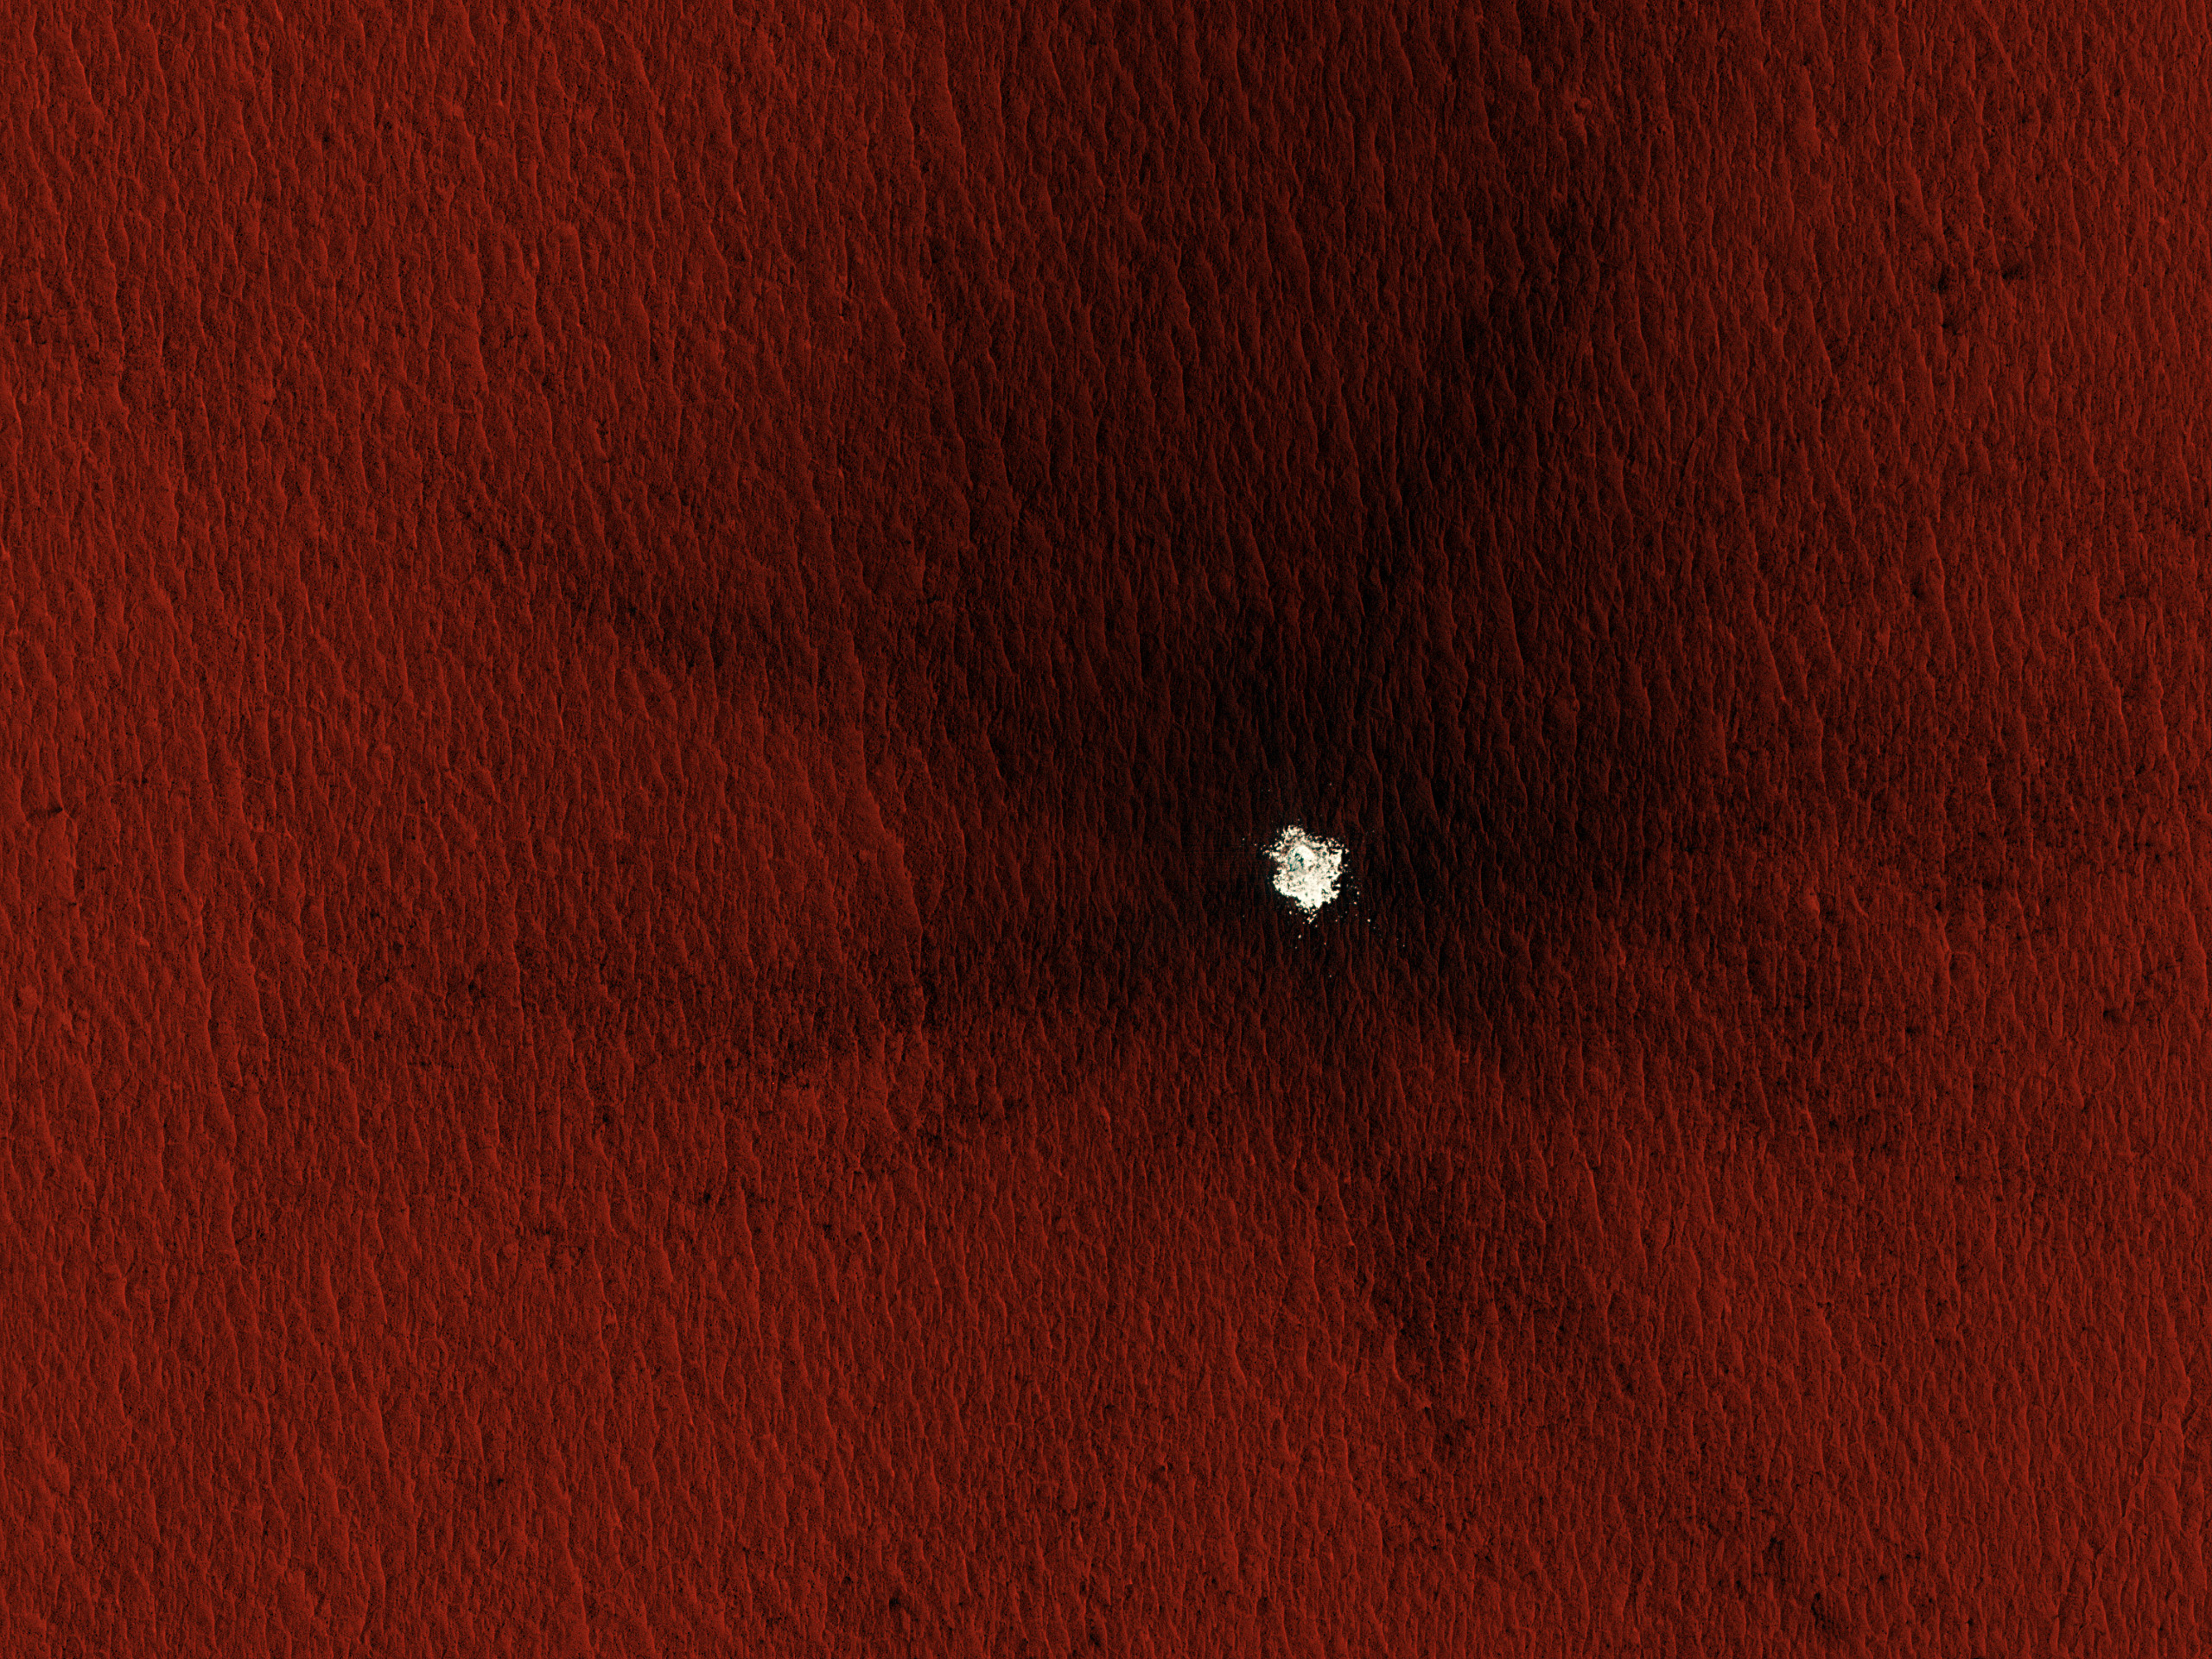 Icy craters on Mars: Check out this image by NASA's HiRISE camera 